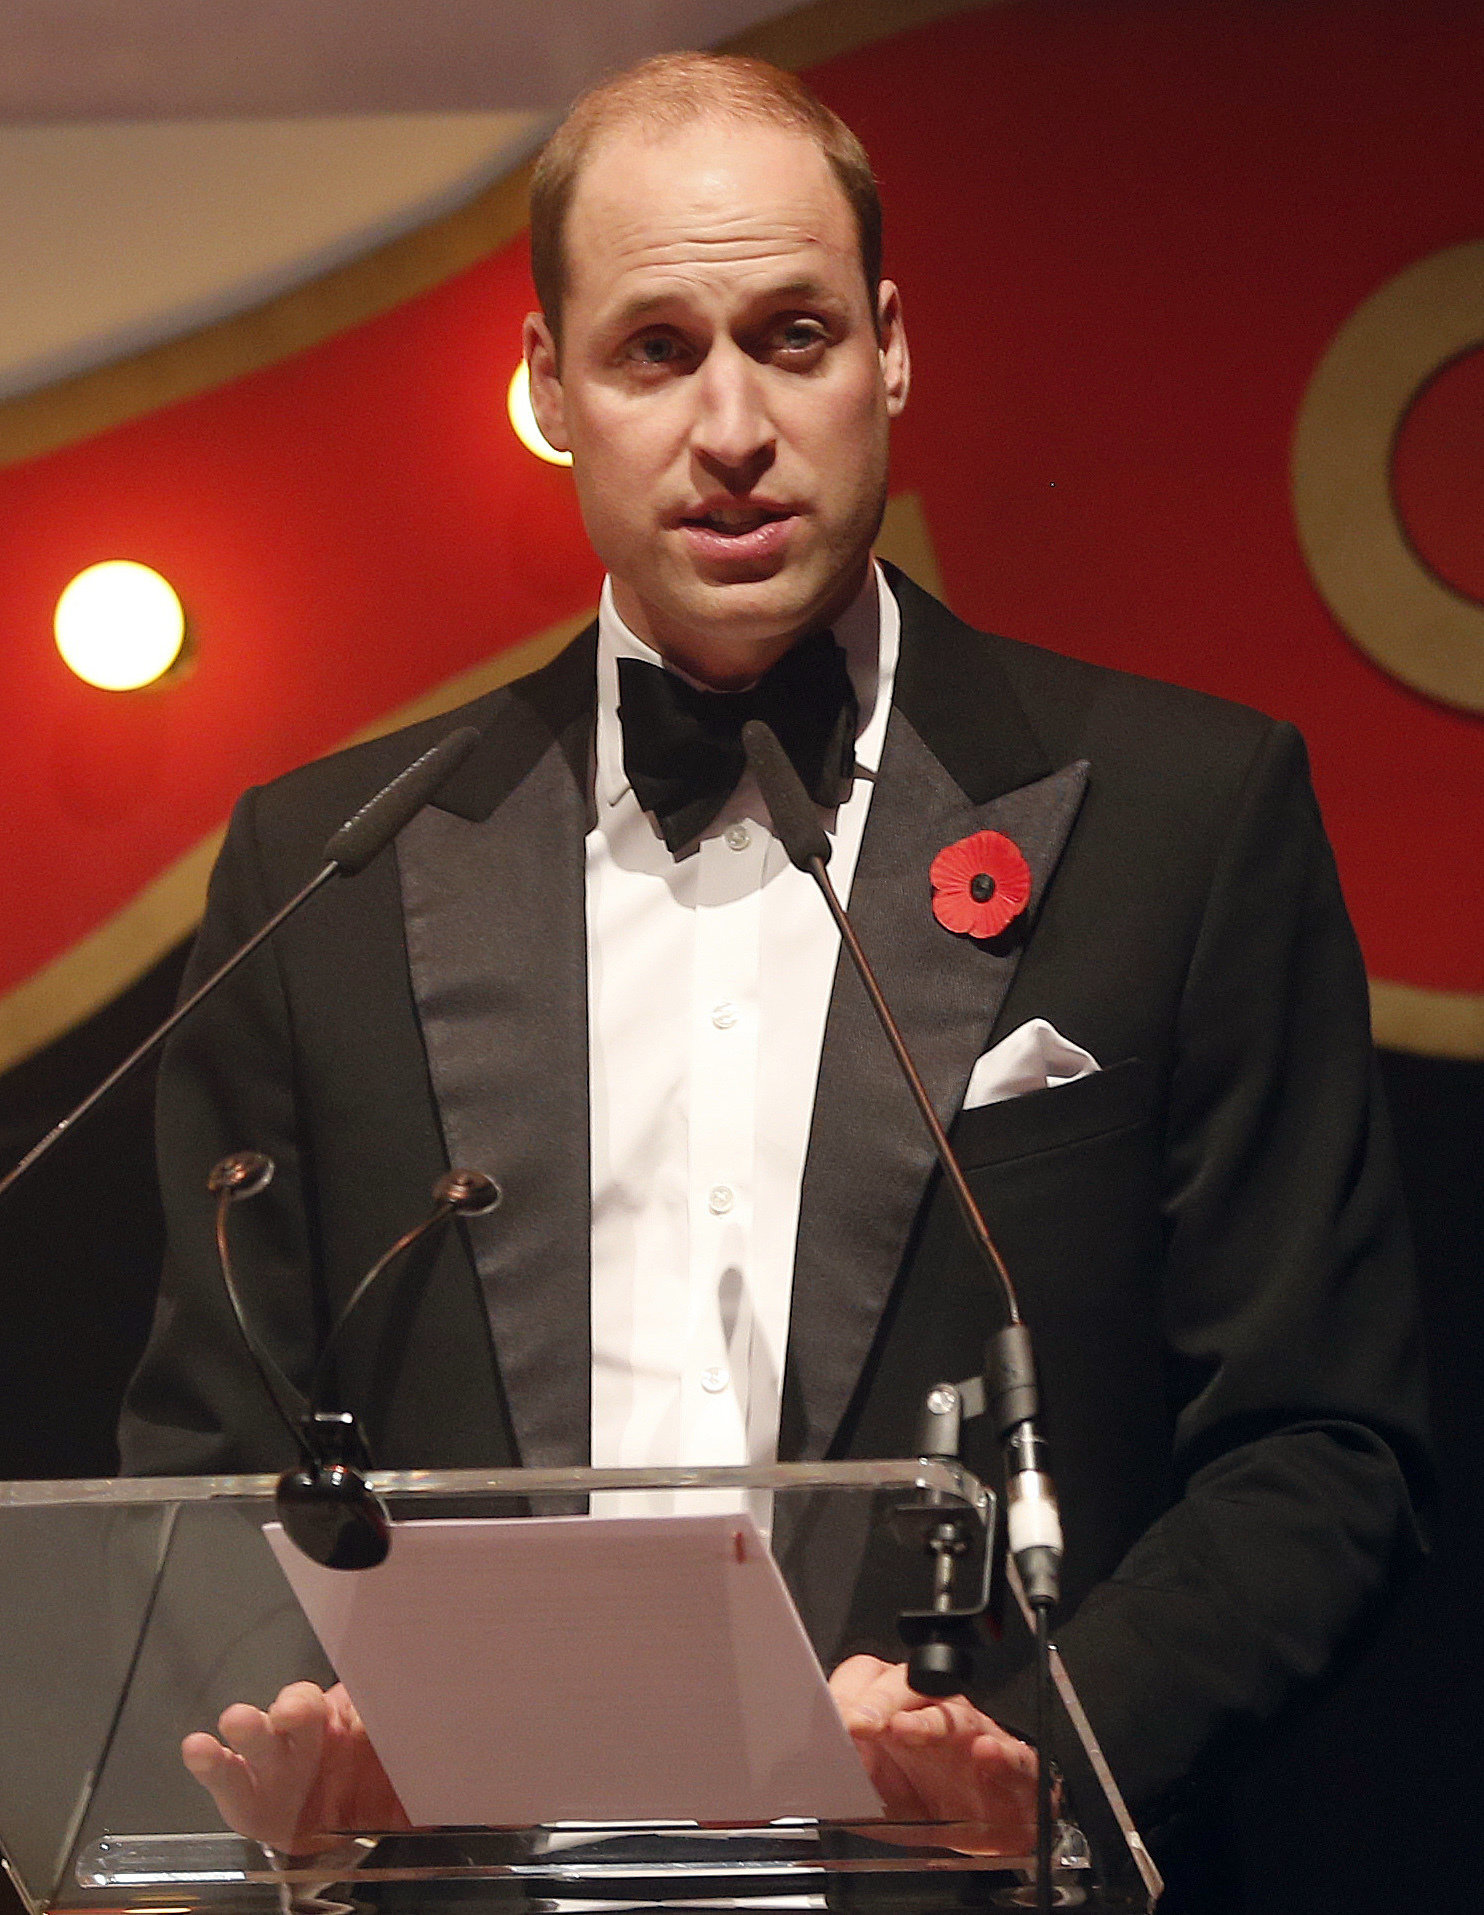 Royal Patron of SkillForce, Prince William, Duke of Cambridge delivers a speech at the annual SkillForce Gala jointly hosted by The Children's Trust on 6 November 2017 in London.